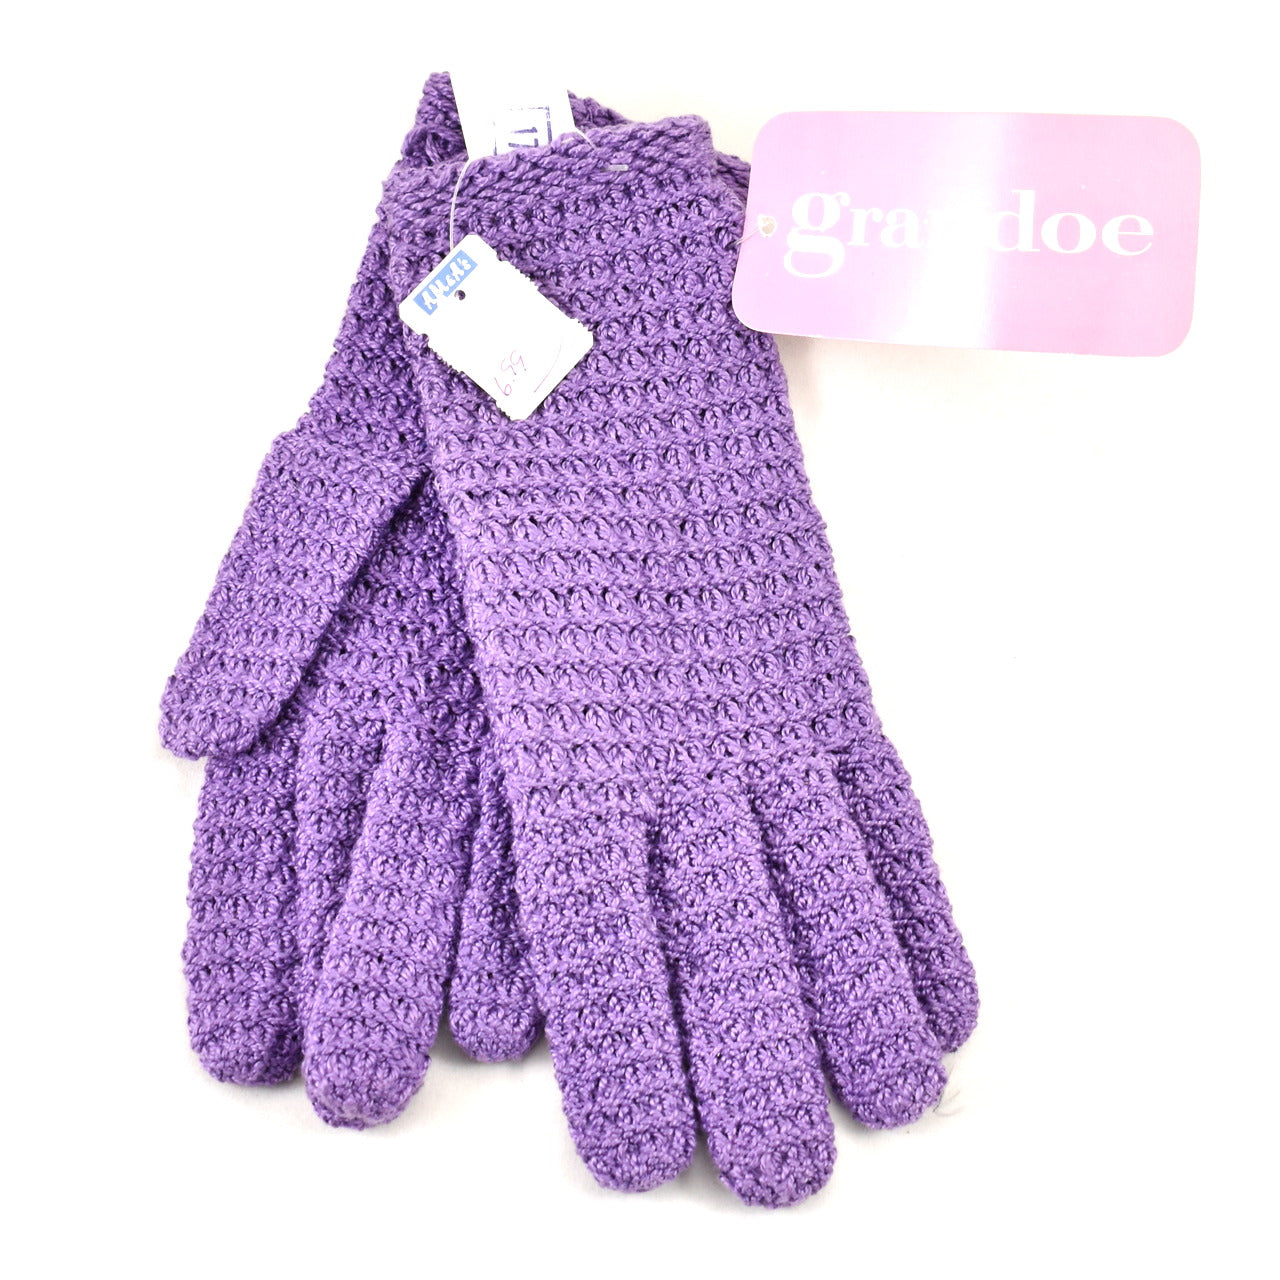 NWT Purple Crocheted Vintage Cotton Gloves Cats Like Us